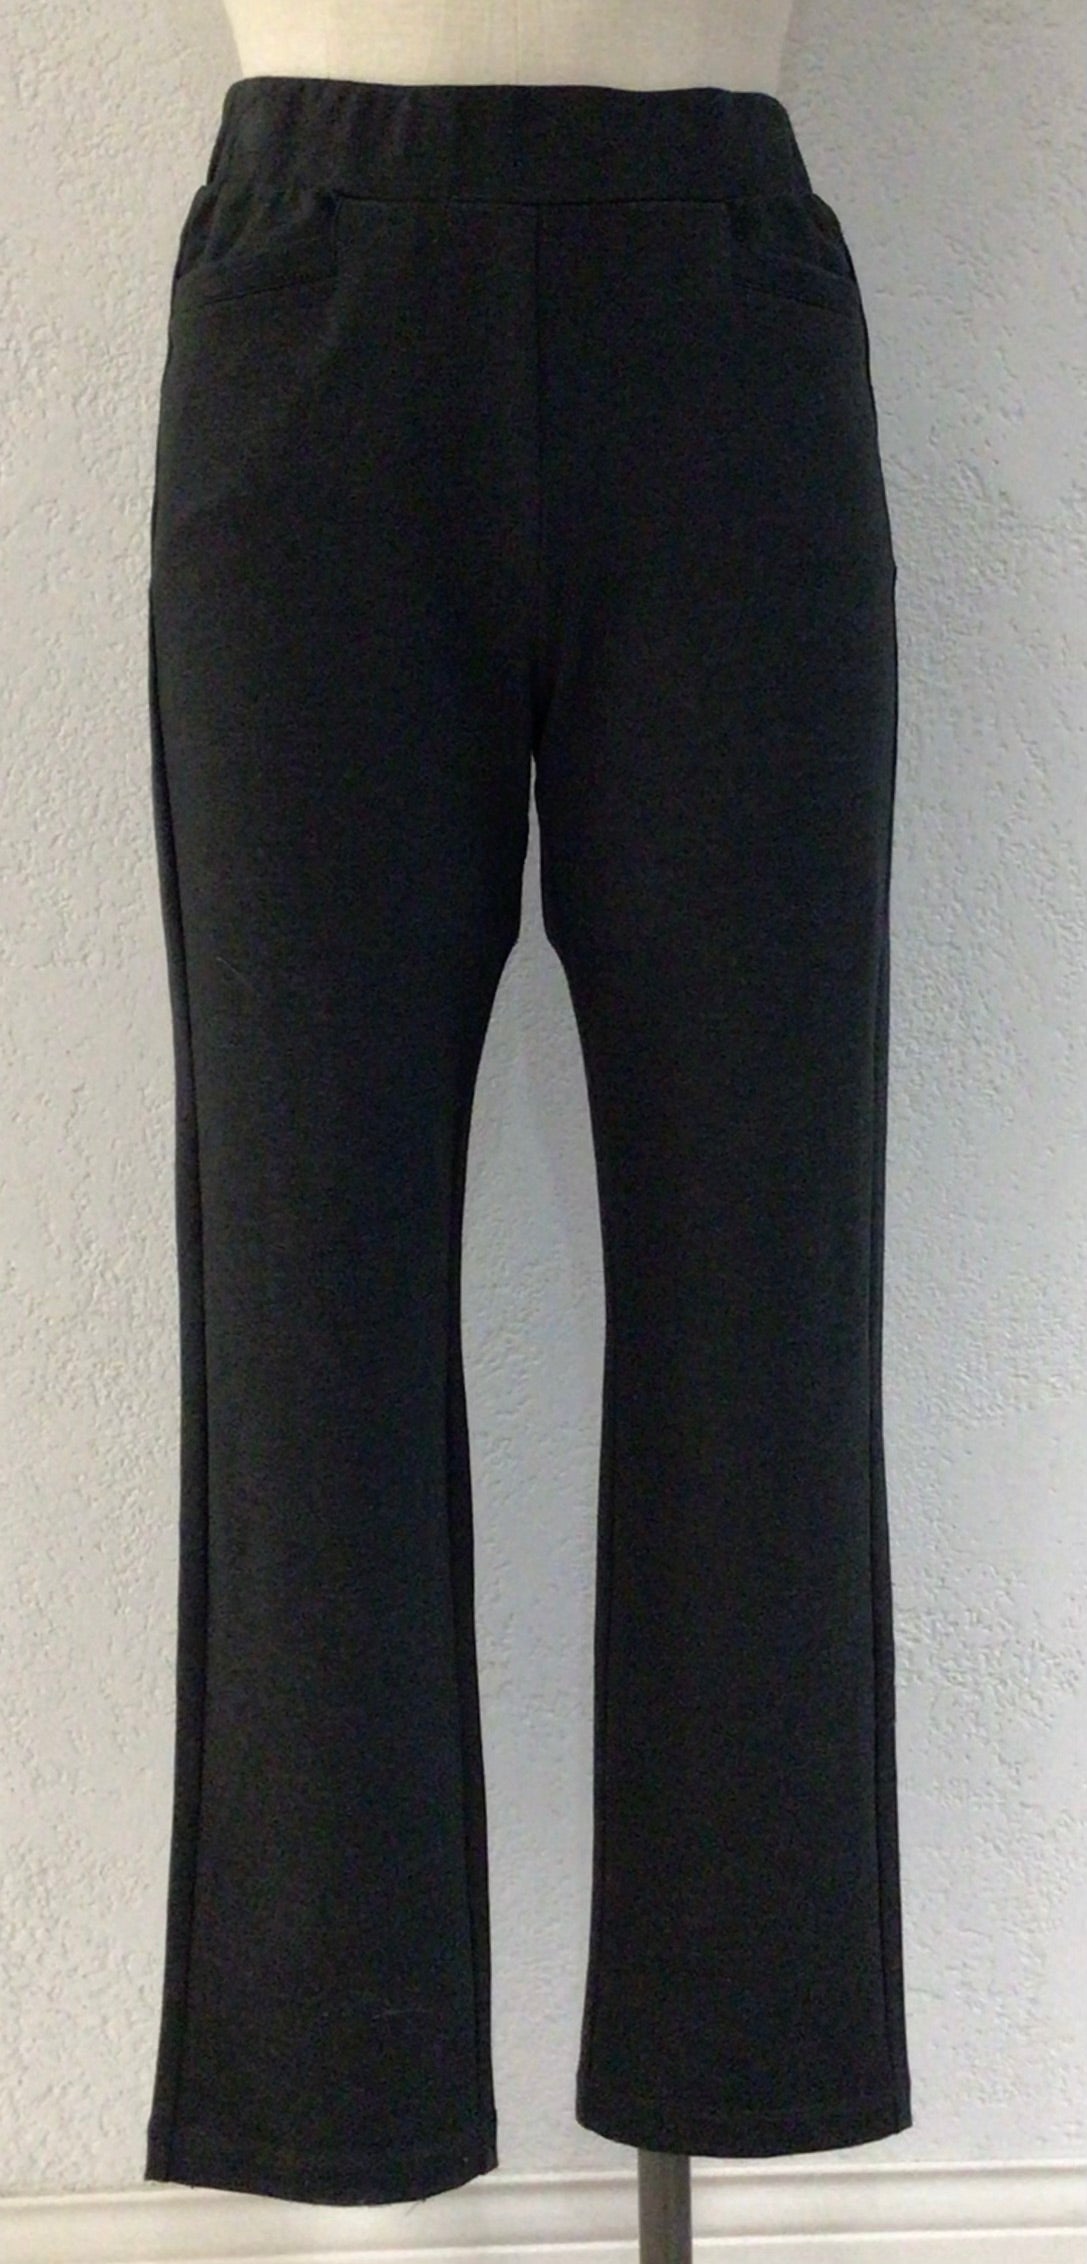 Wild Palms Charcoal Slim Pull On Pant 5742